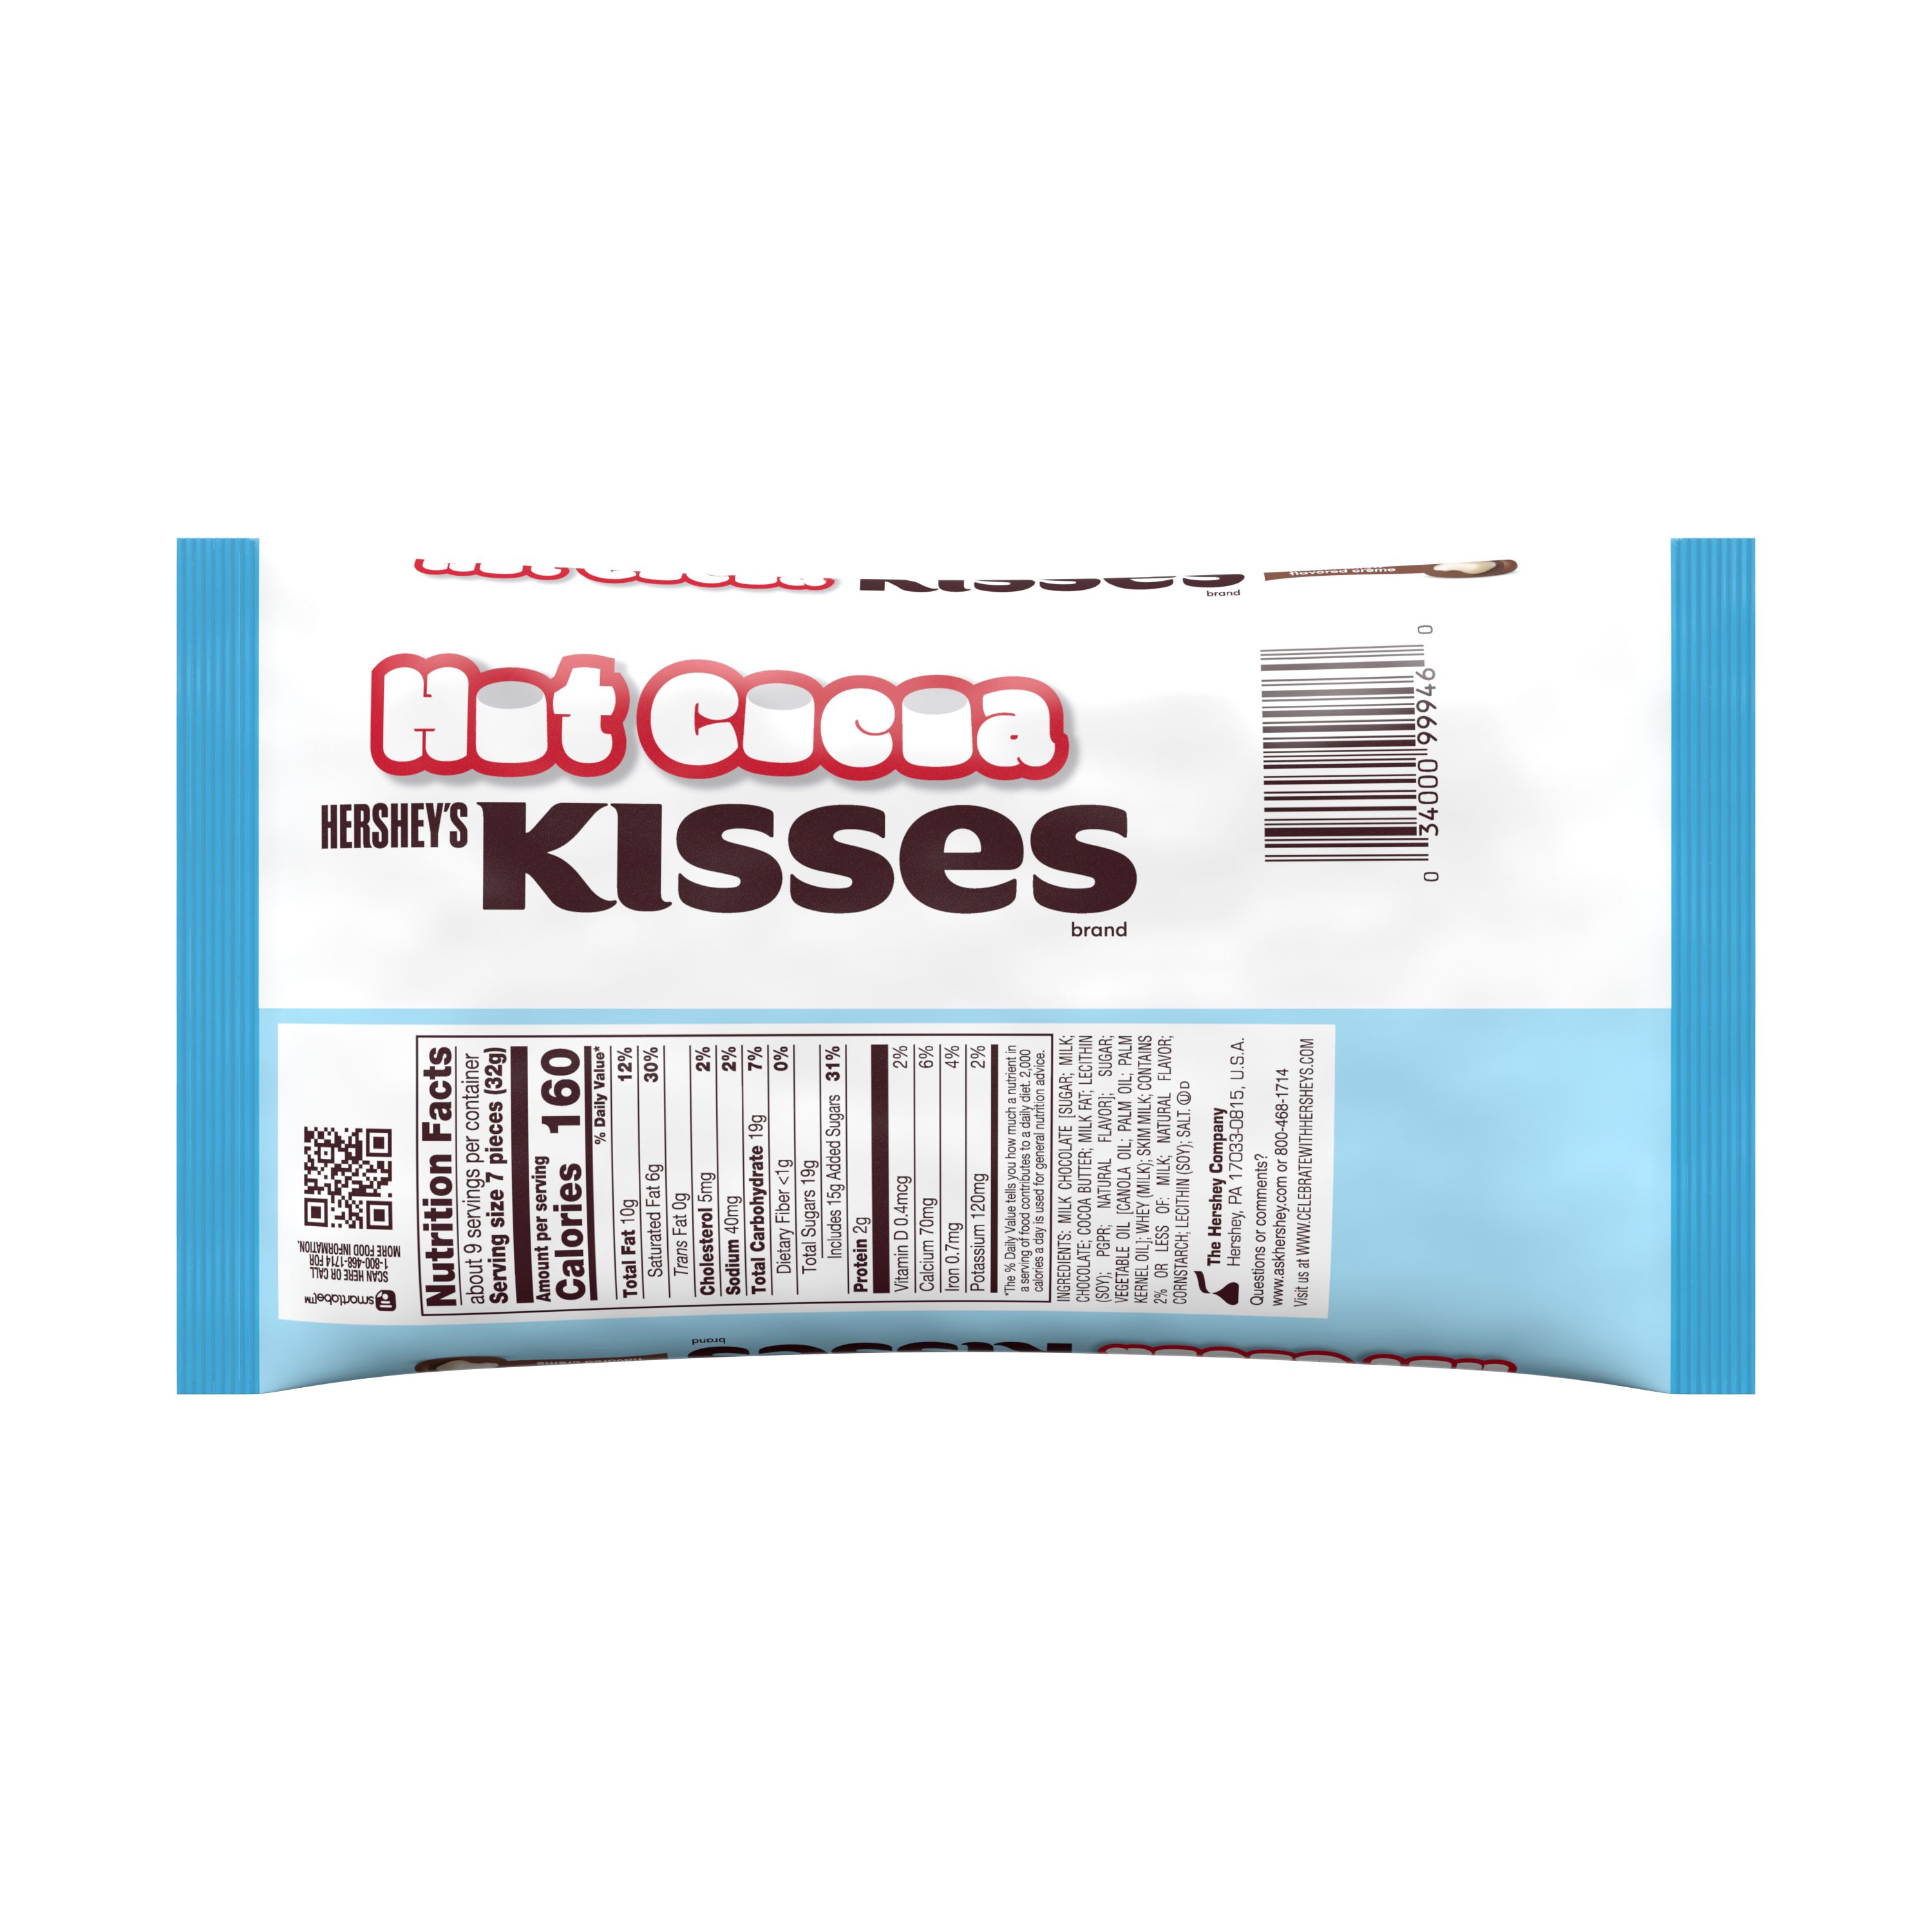 Hershey's Kisses Hot Cocoa Chocolate Candy, Holiday Bag, 10 Oz. - image 2 of 6